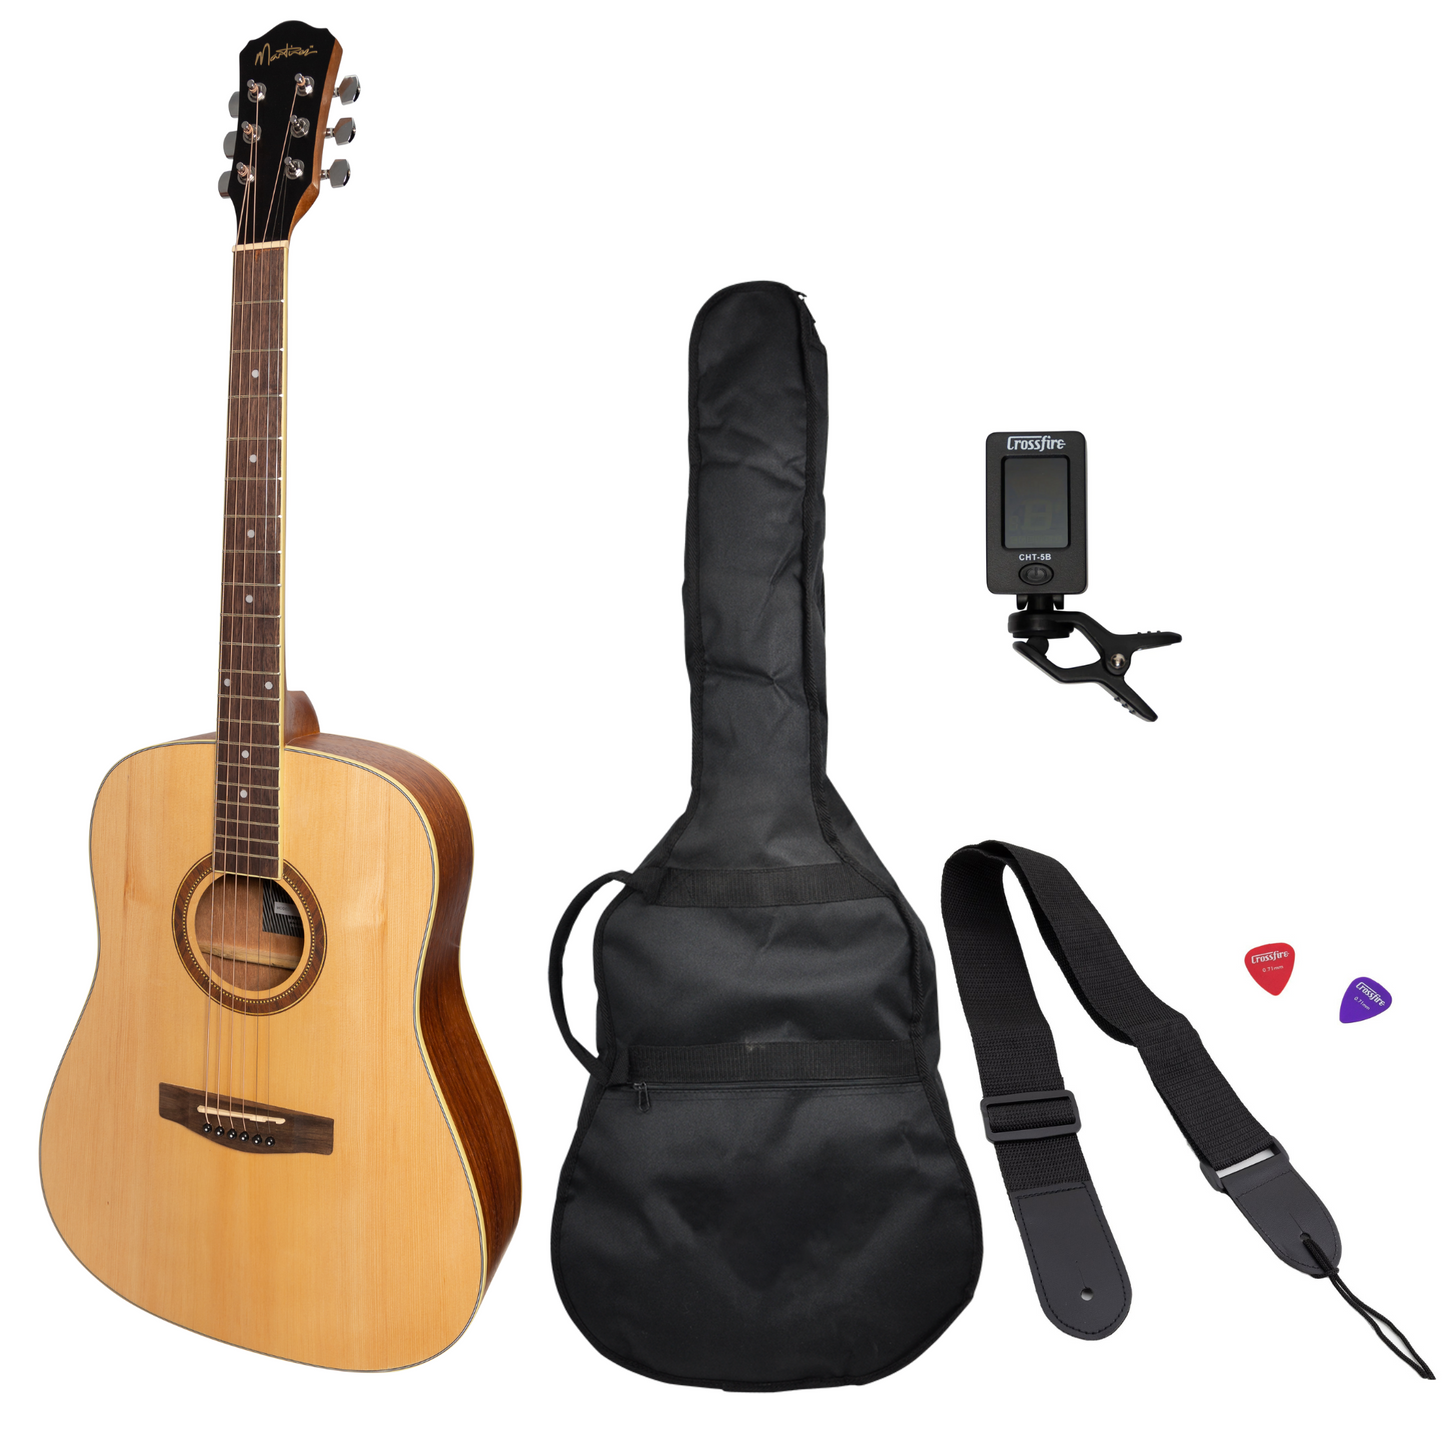 Martinez '41 Series' Dreadnought Acoustic Guitar Pack (Spruce/Rosewood)